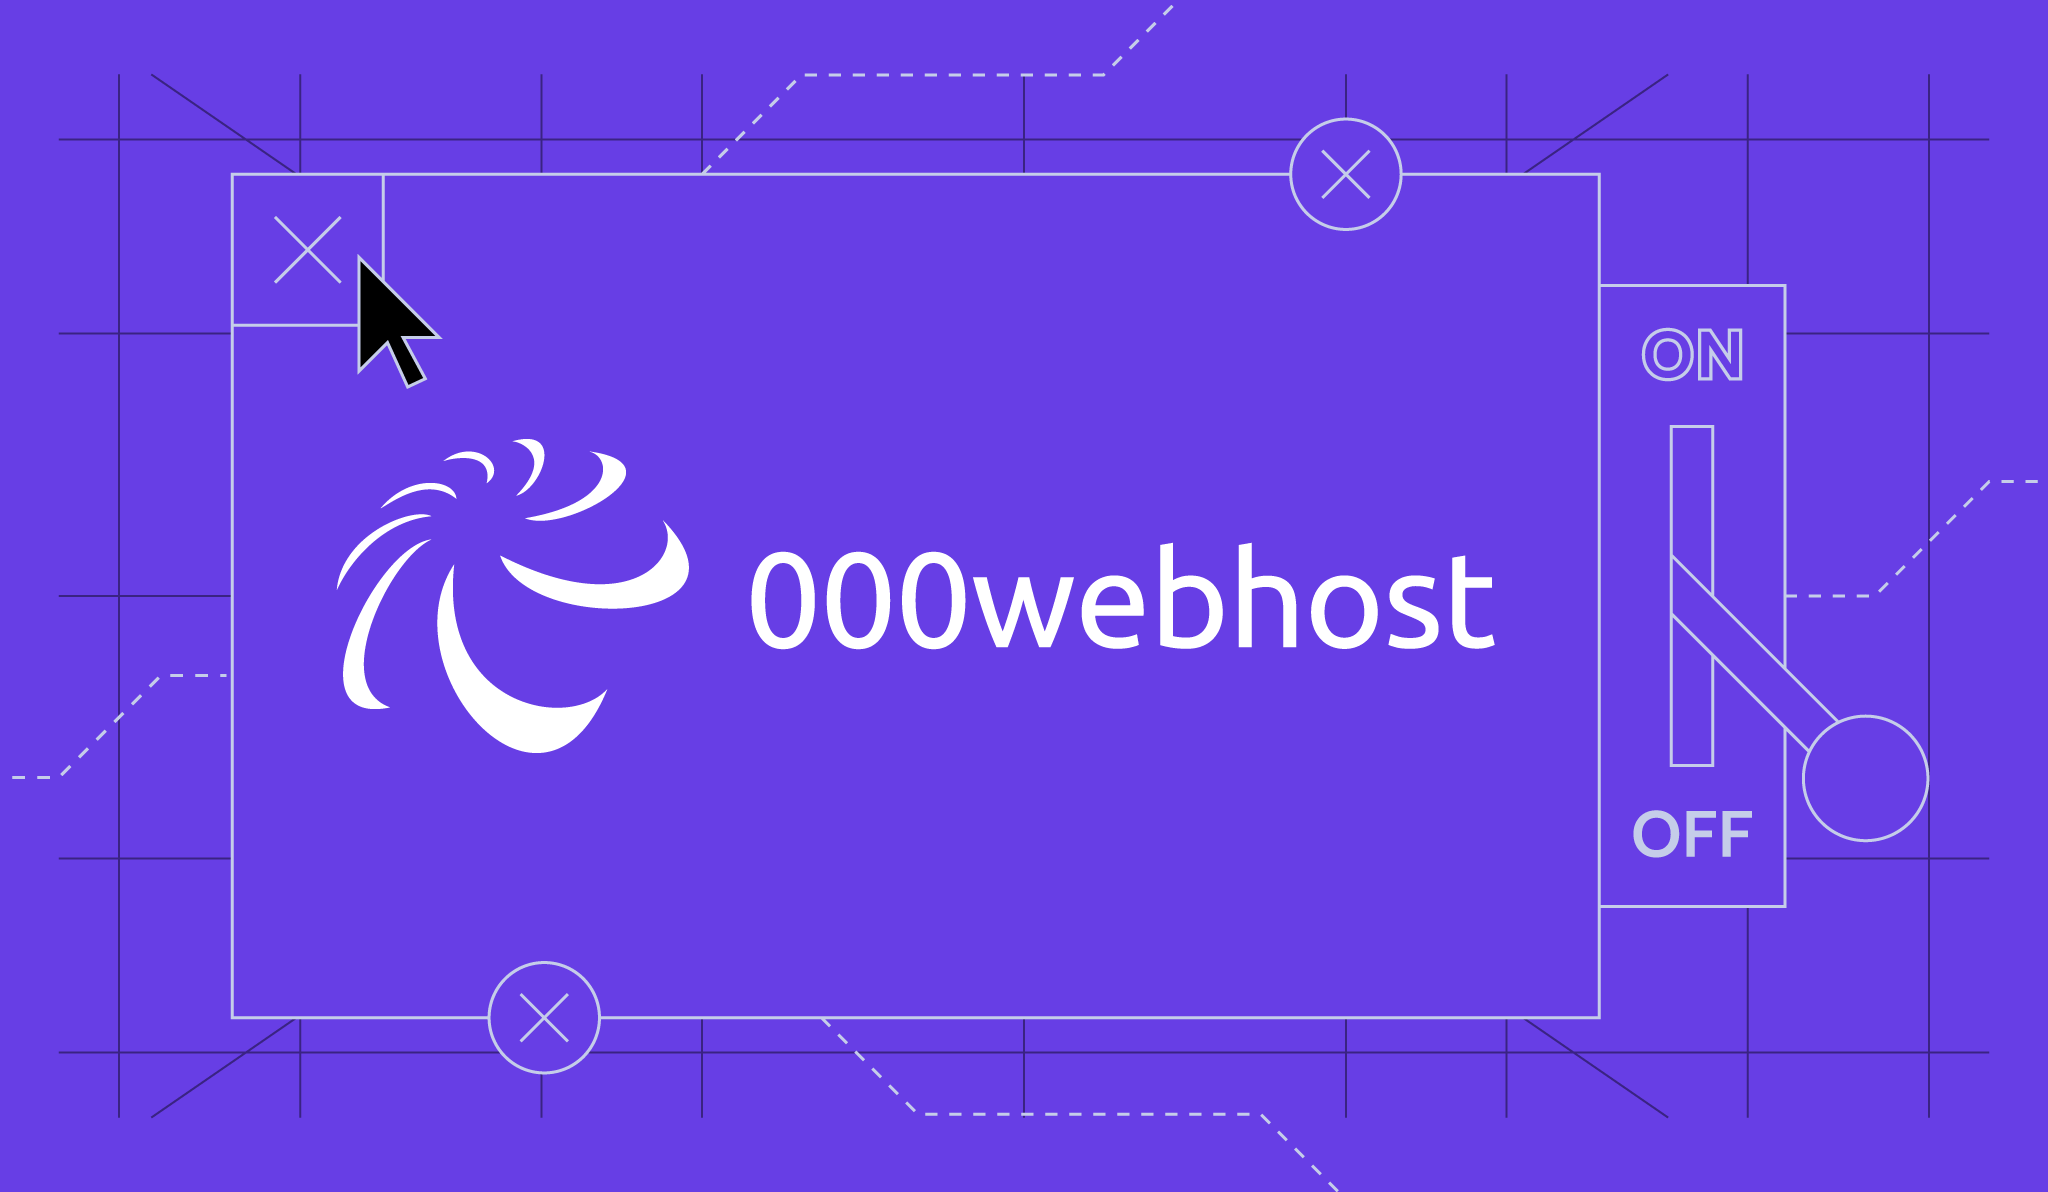 As the Web Hosting Market Changes, 000webhost Closes